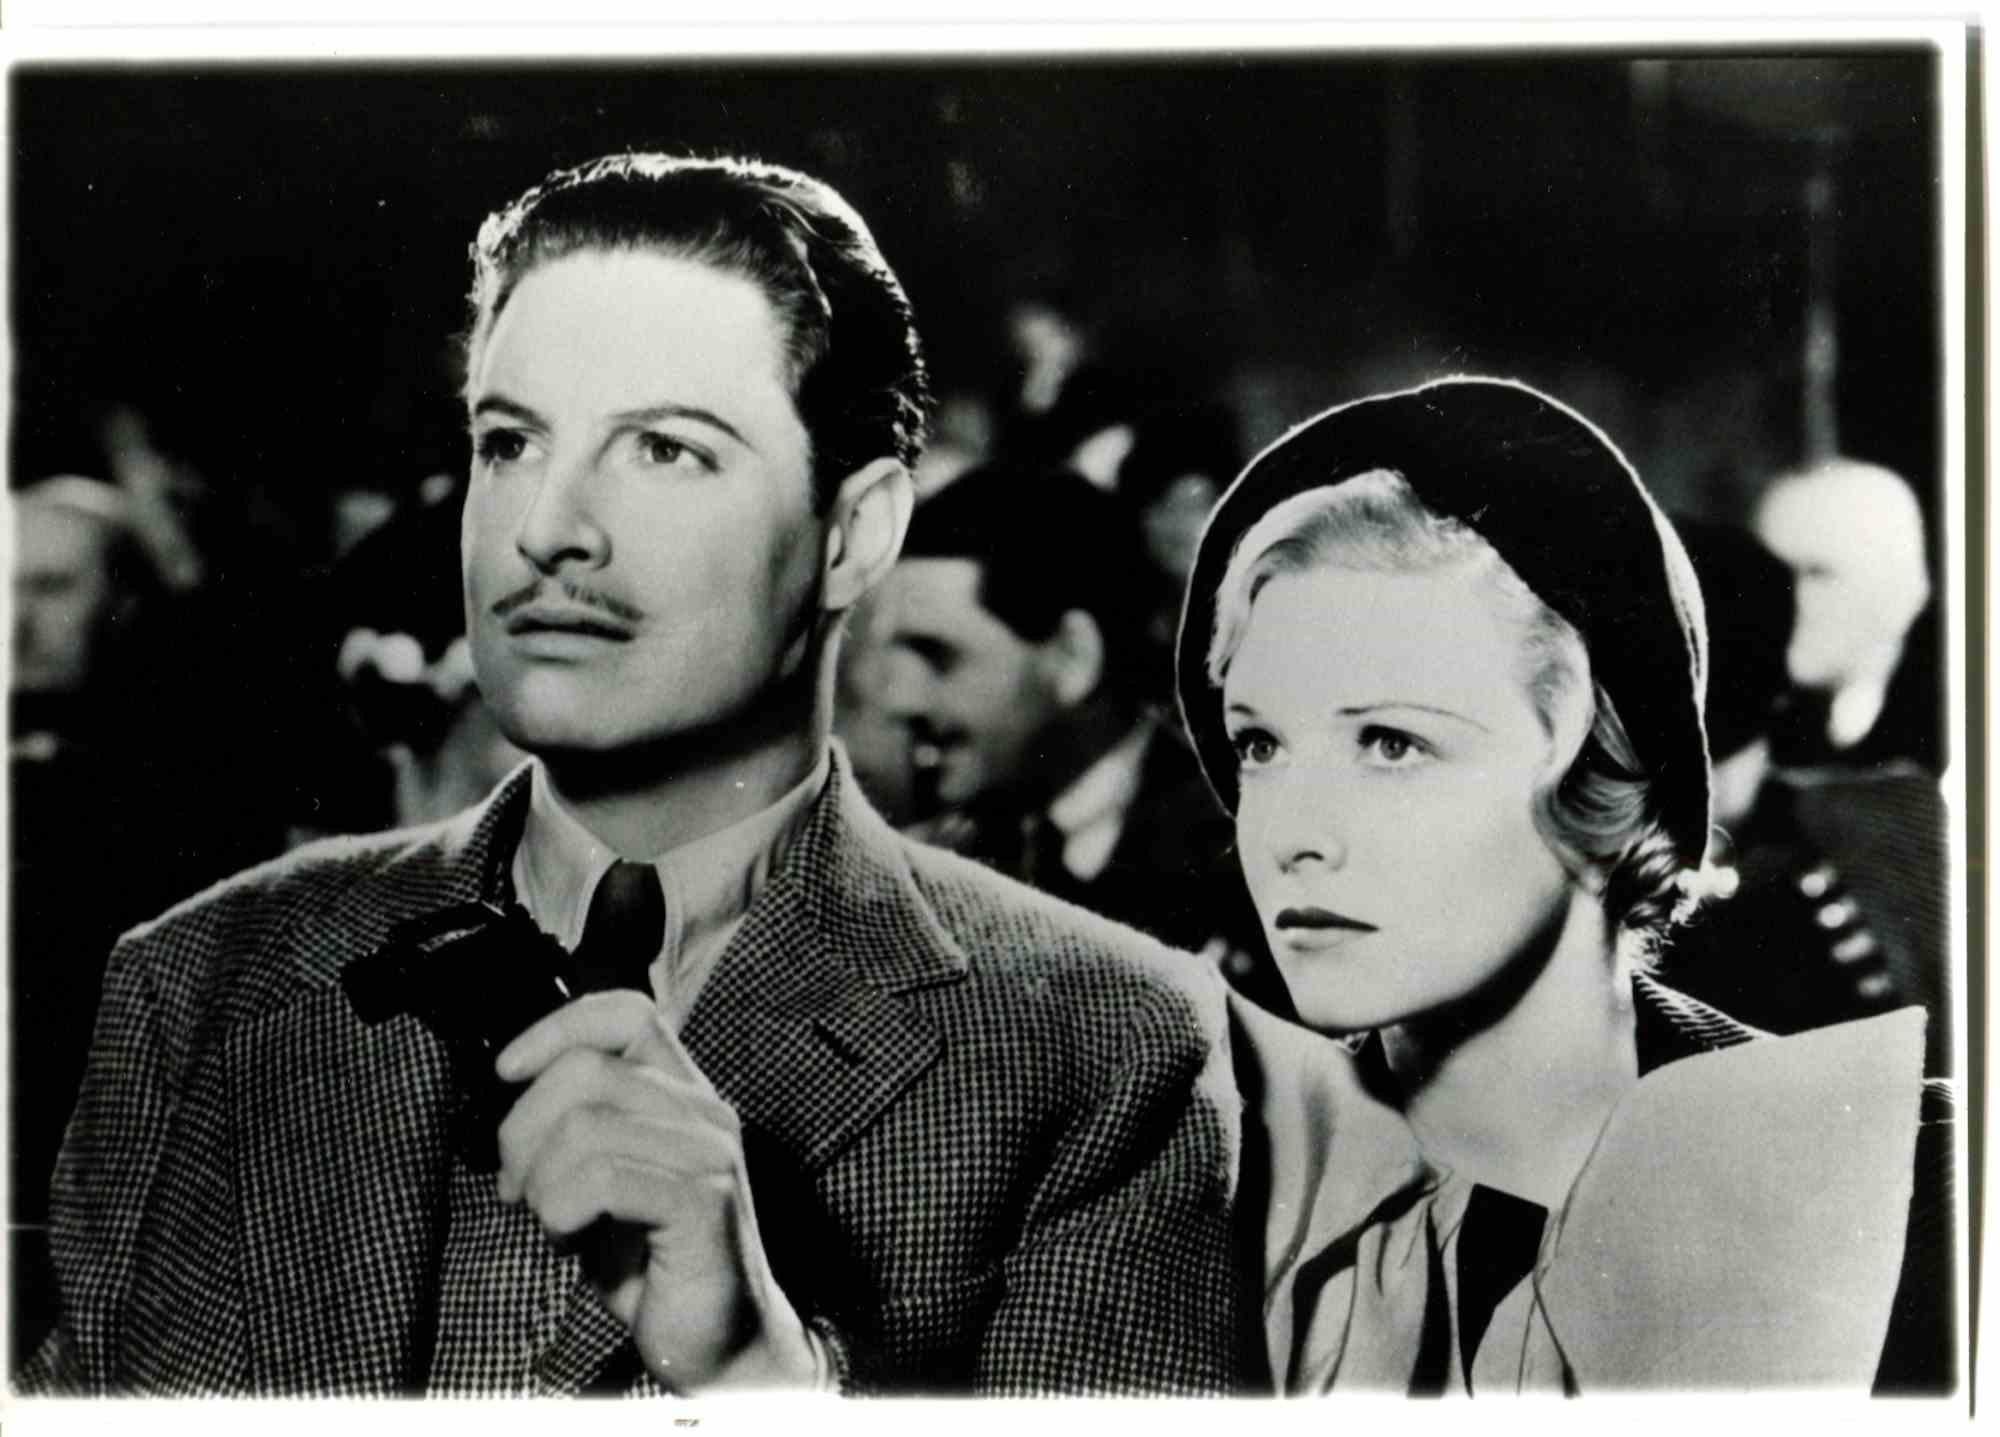 Unknown Figurative Photograph -  Robert Donat and Madeleine Carroll in Film The 39 Steps - 1935